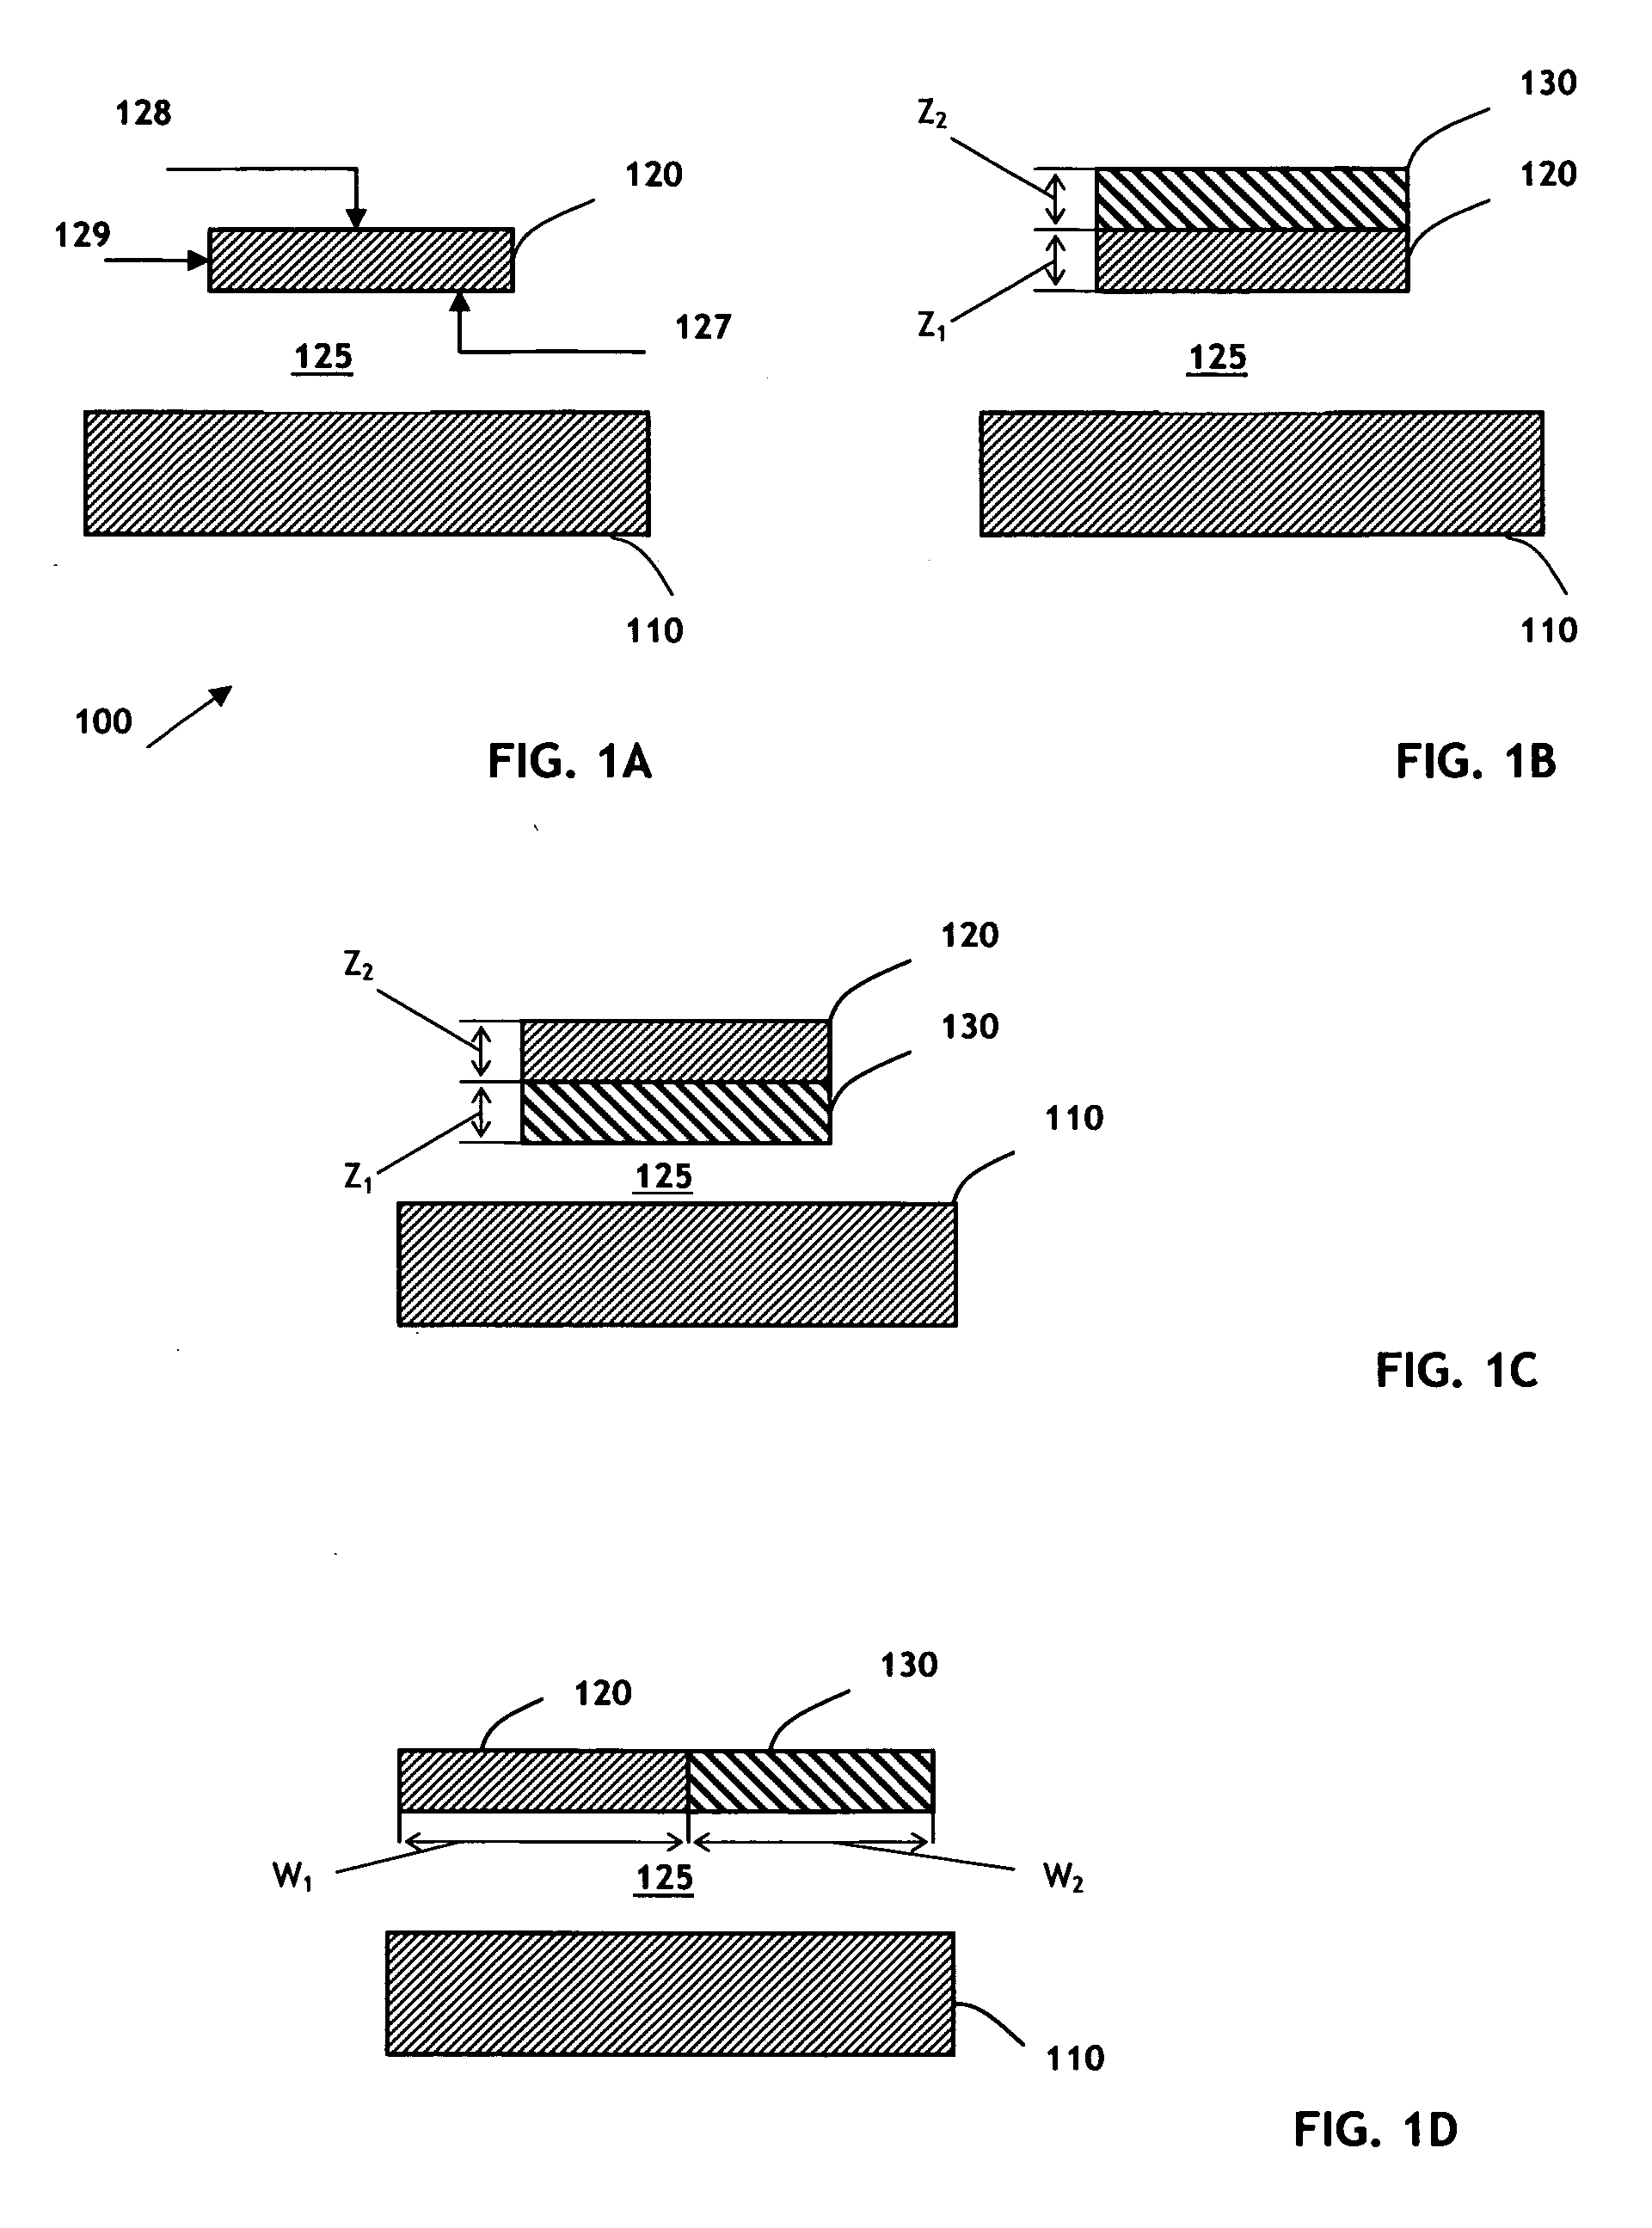 Lattice-mismatched semiconductor structures employing seed layers and related fabrication methods